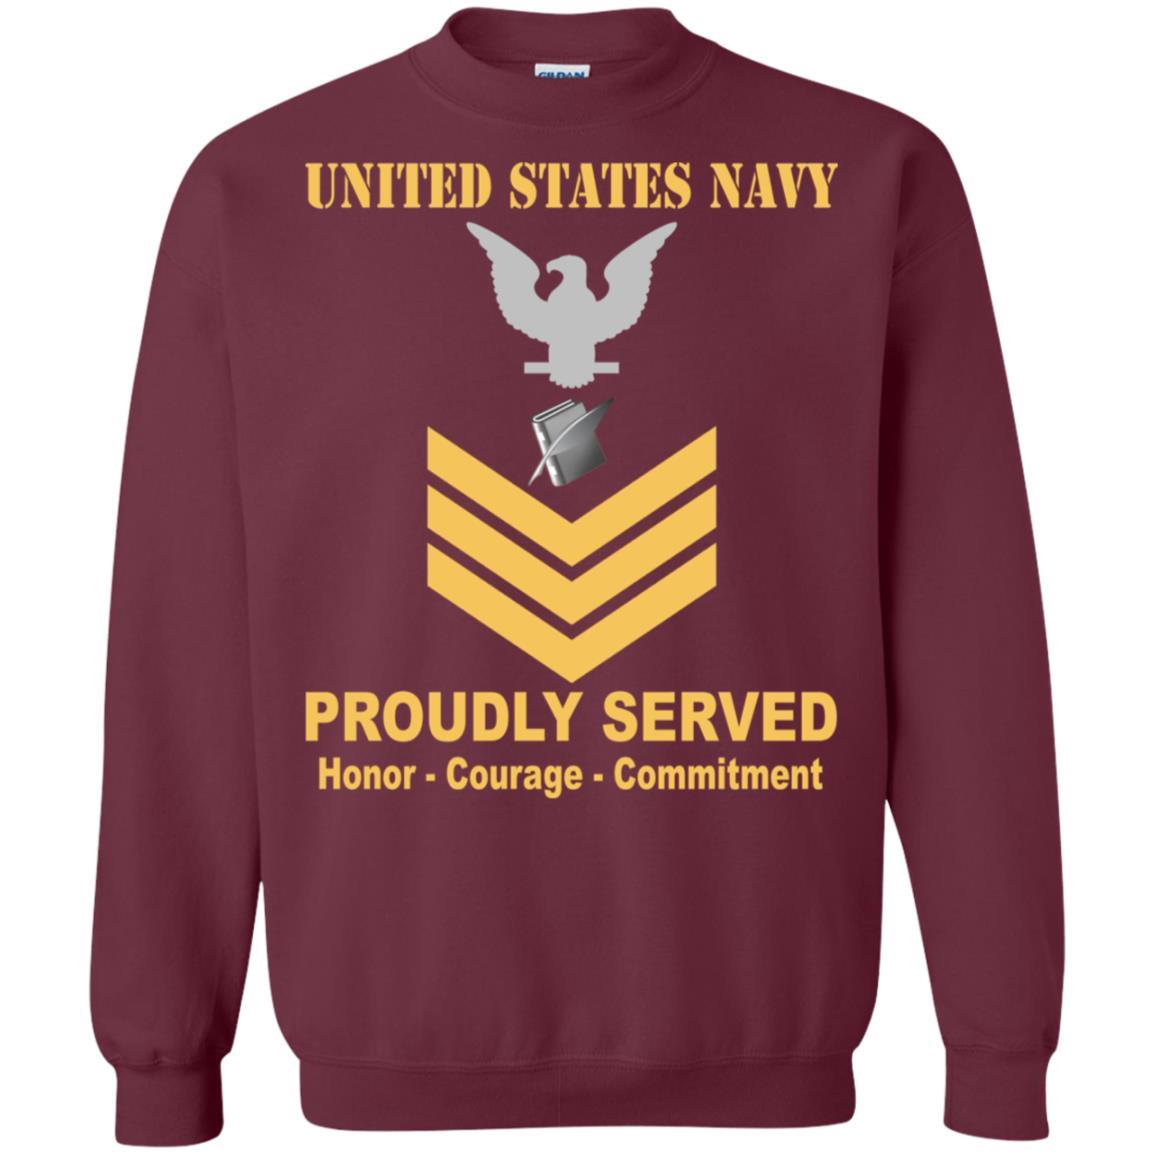 Navy Personnel Specialist Navy PS E-6 Rating Badges Proudly Served T-Shirt For Men On Front-TShirt-Navy-Veterans Nation